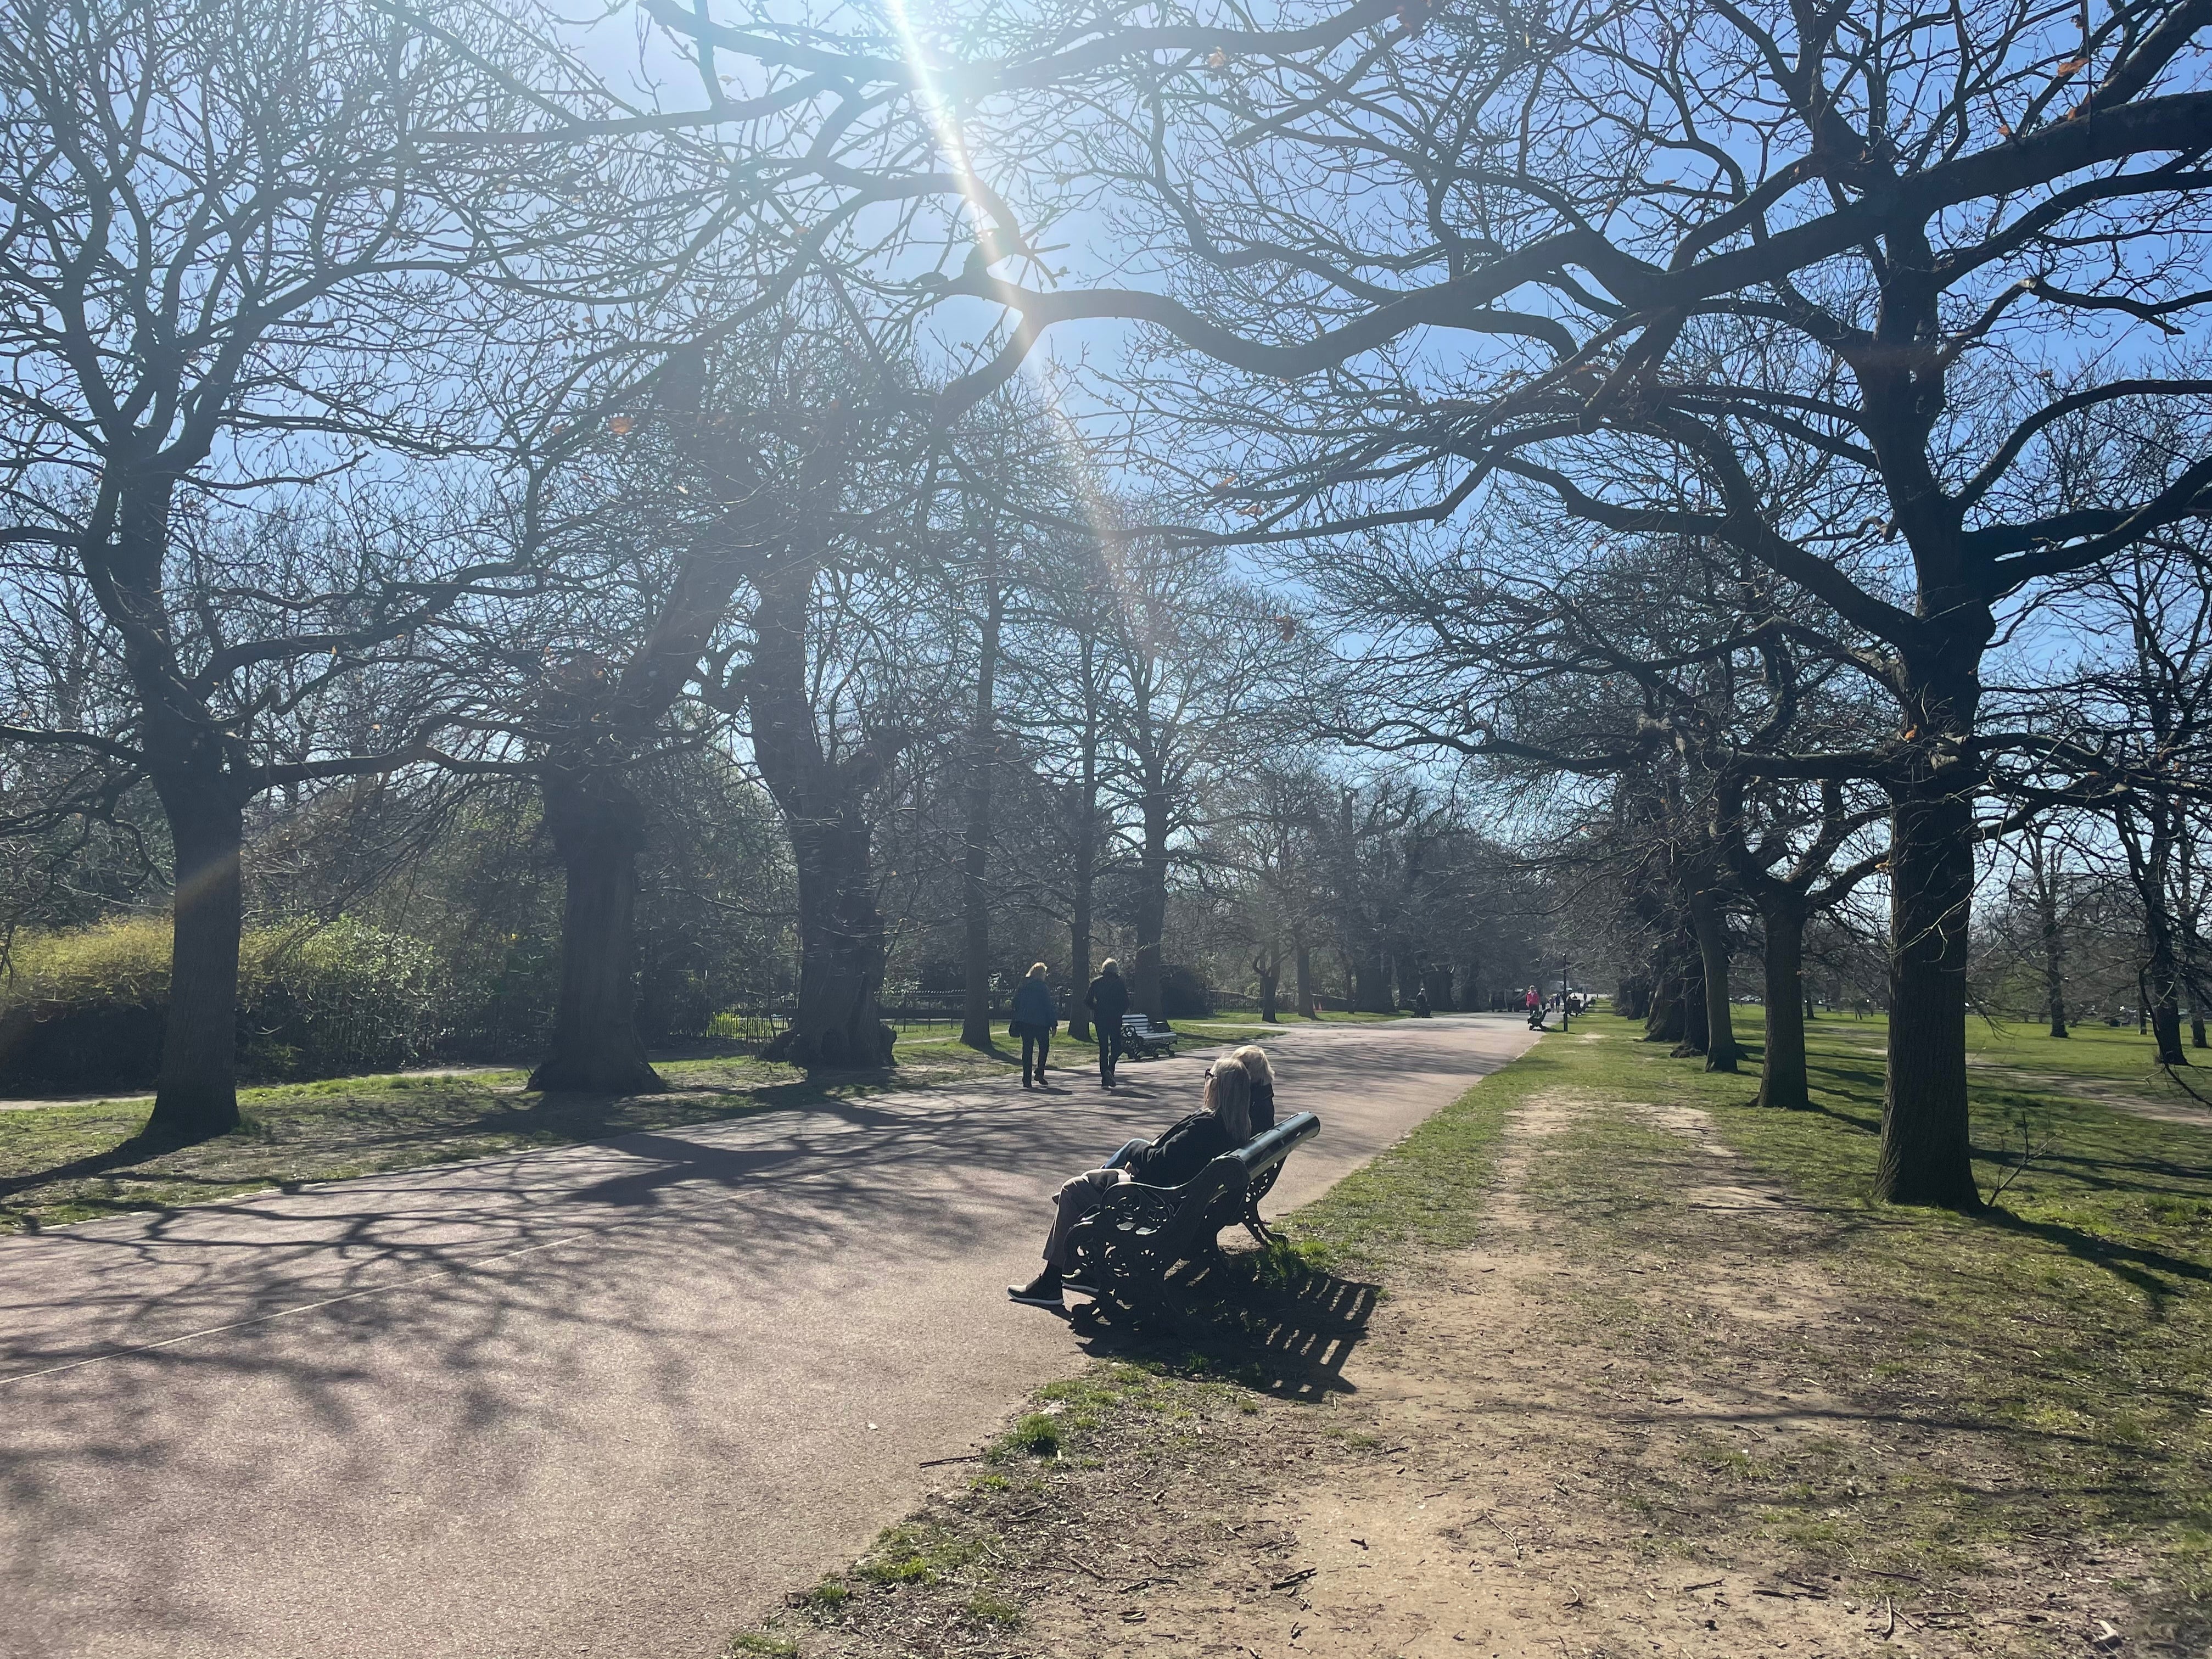 People meet friends for a walk or to sit on a bench in Greenwich Park on 29 March 2021, when lockdown restrictions have eased to allow up to six people or two households to meet outdoors in England